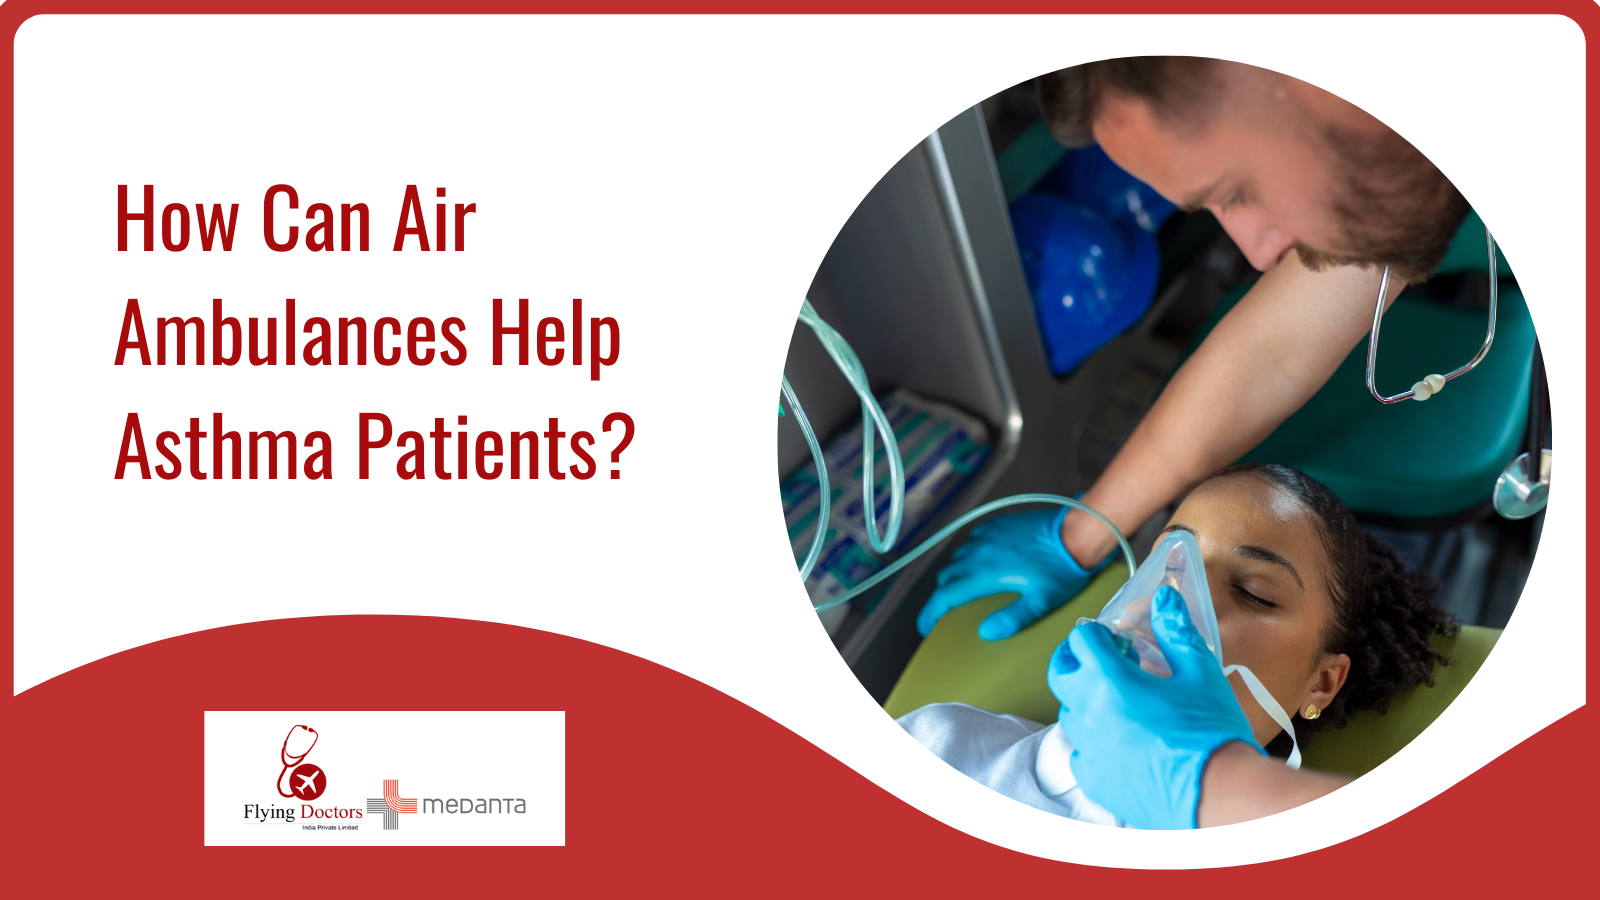 How Can Air Ambulances Help Asthma Patients?